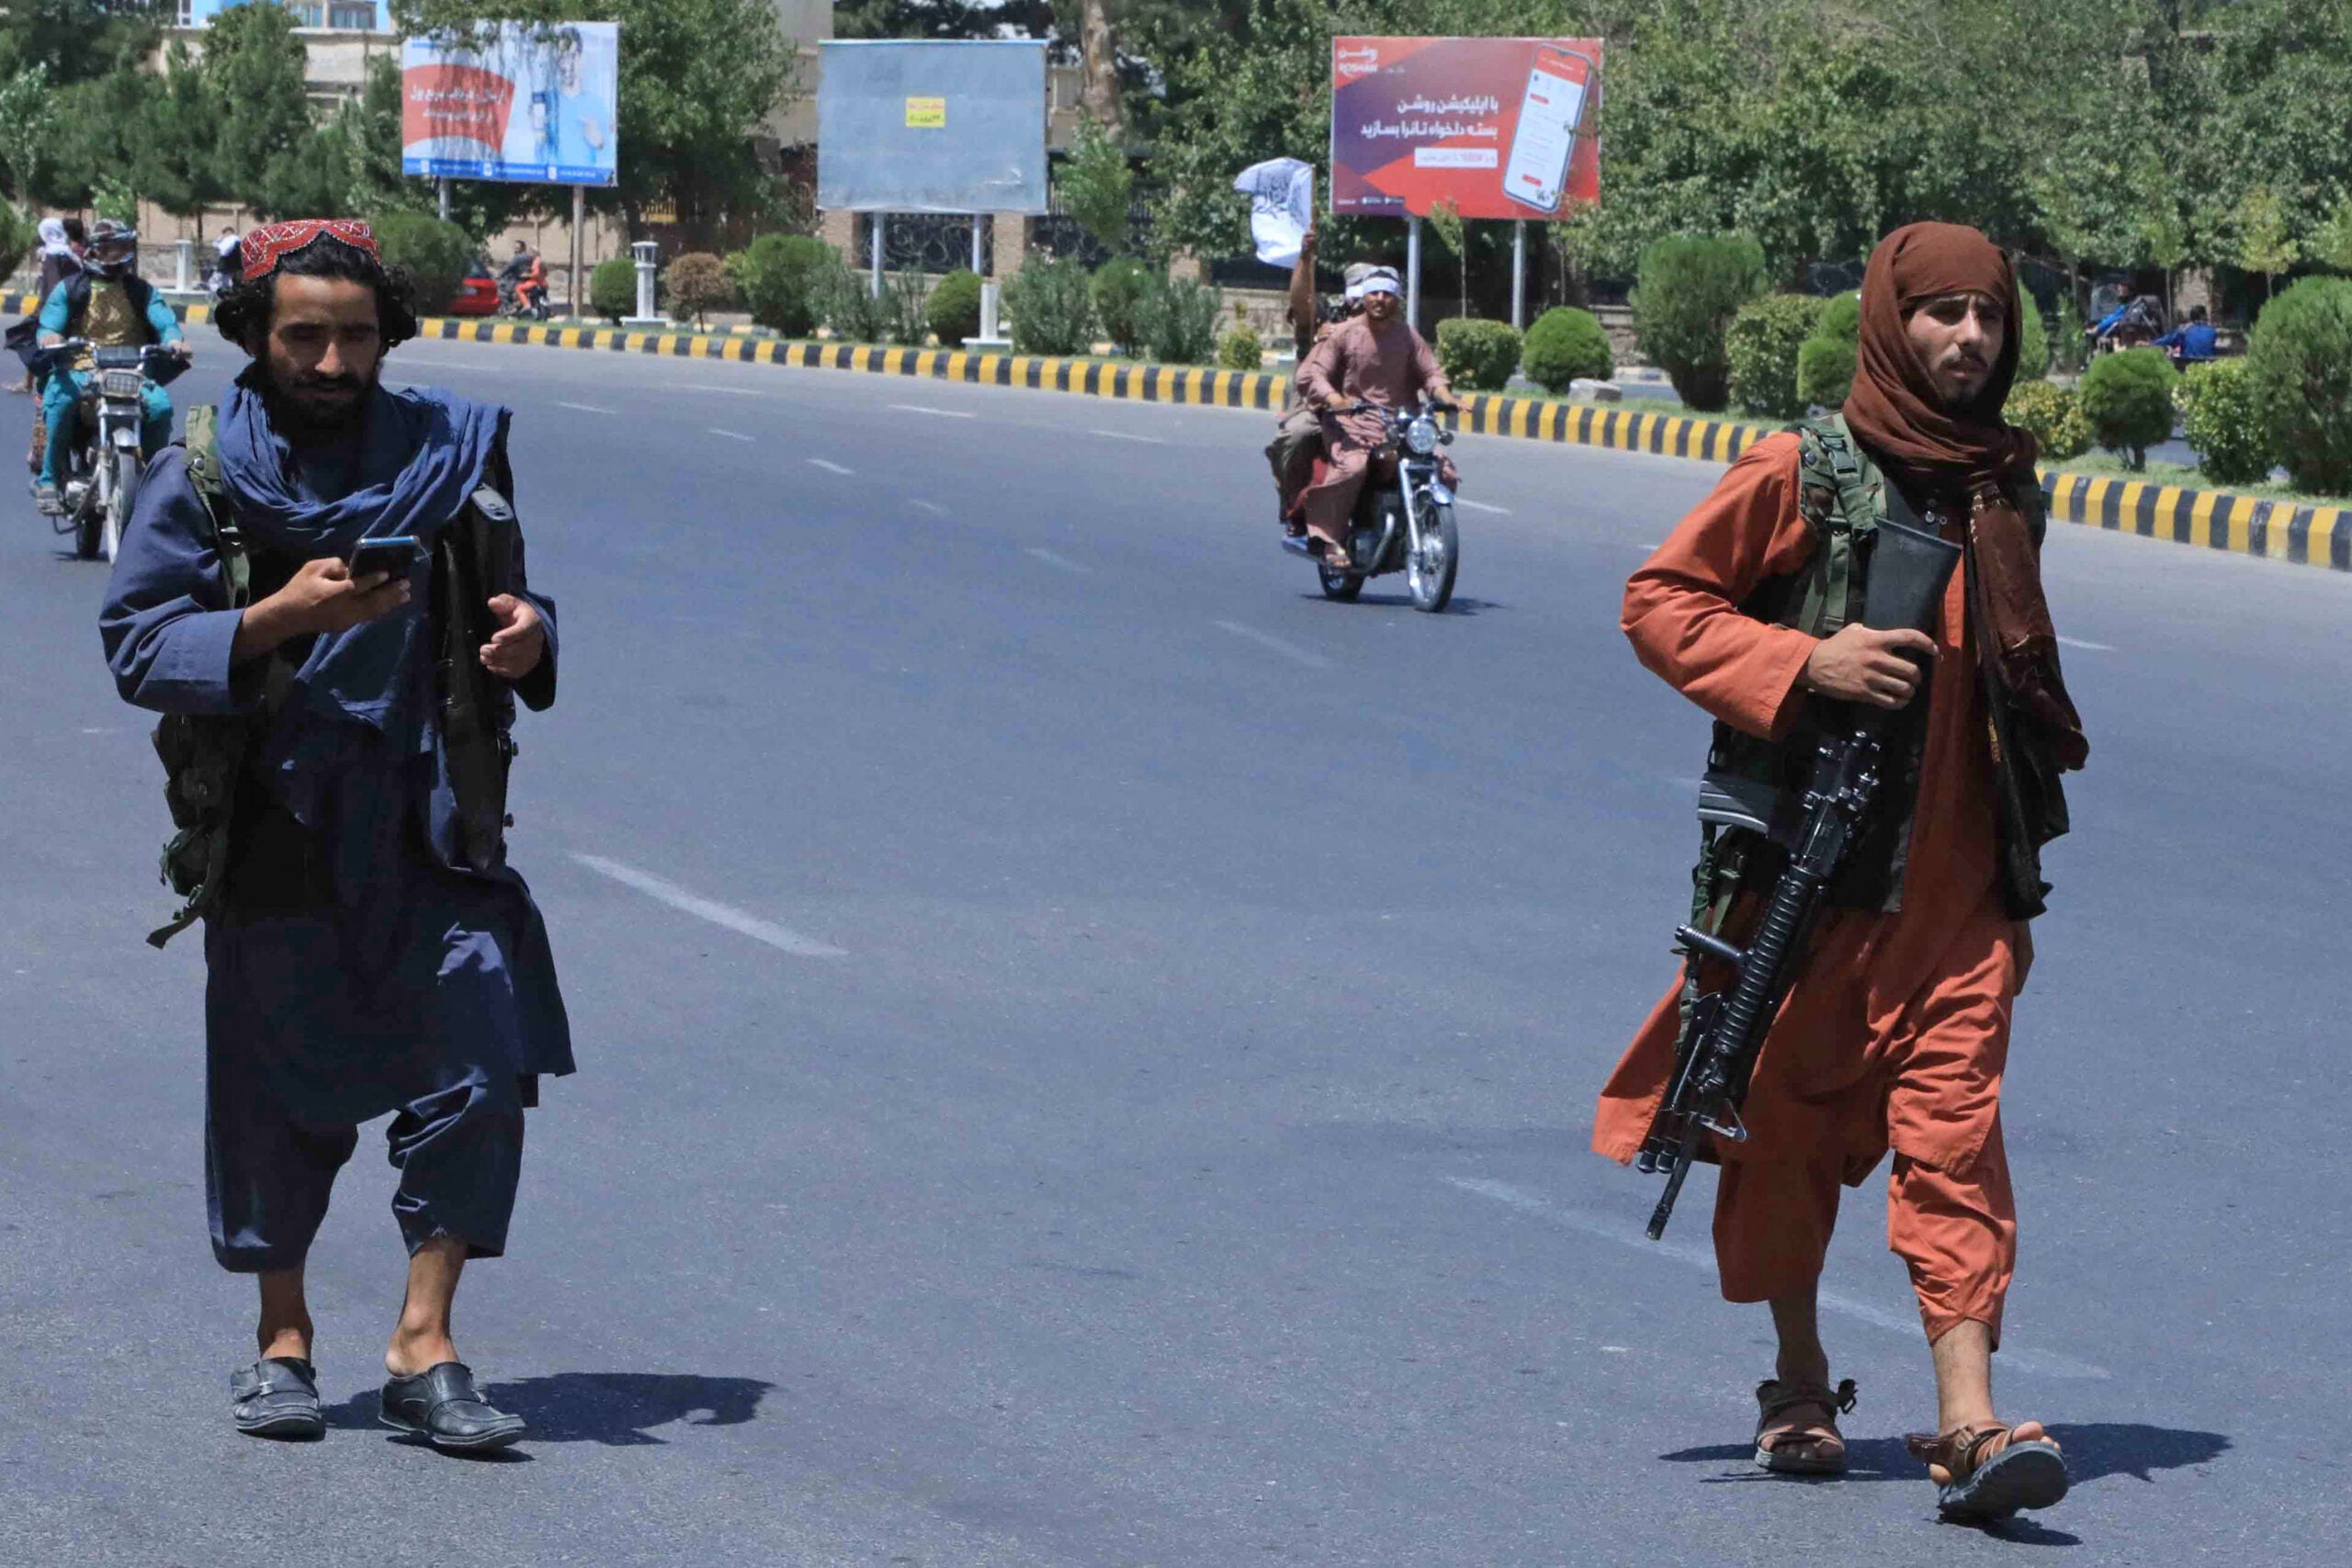 TOPSHOT - Taliban fighters patrol the streets in Herat on August 14, 2021. (Photo by - / AFP) (Photo by -/AFP via Getty Images)